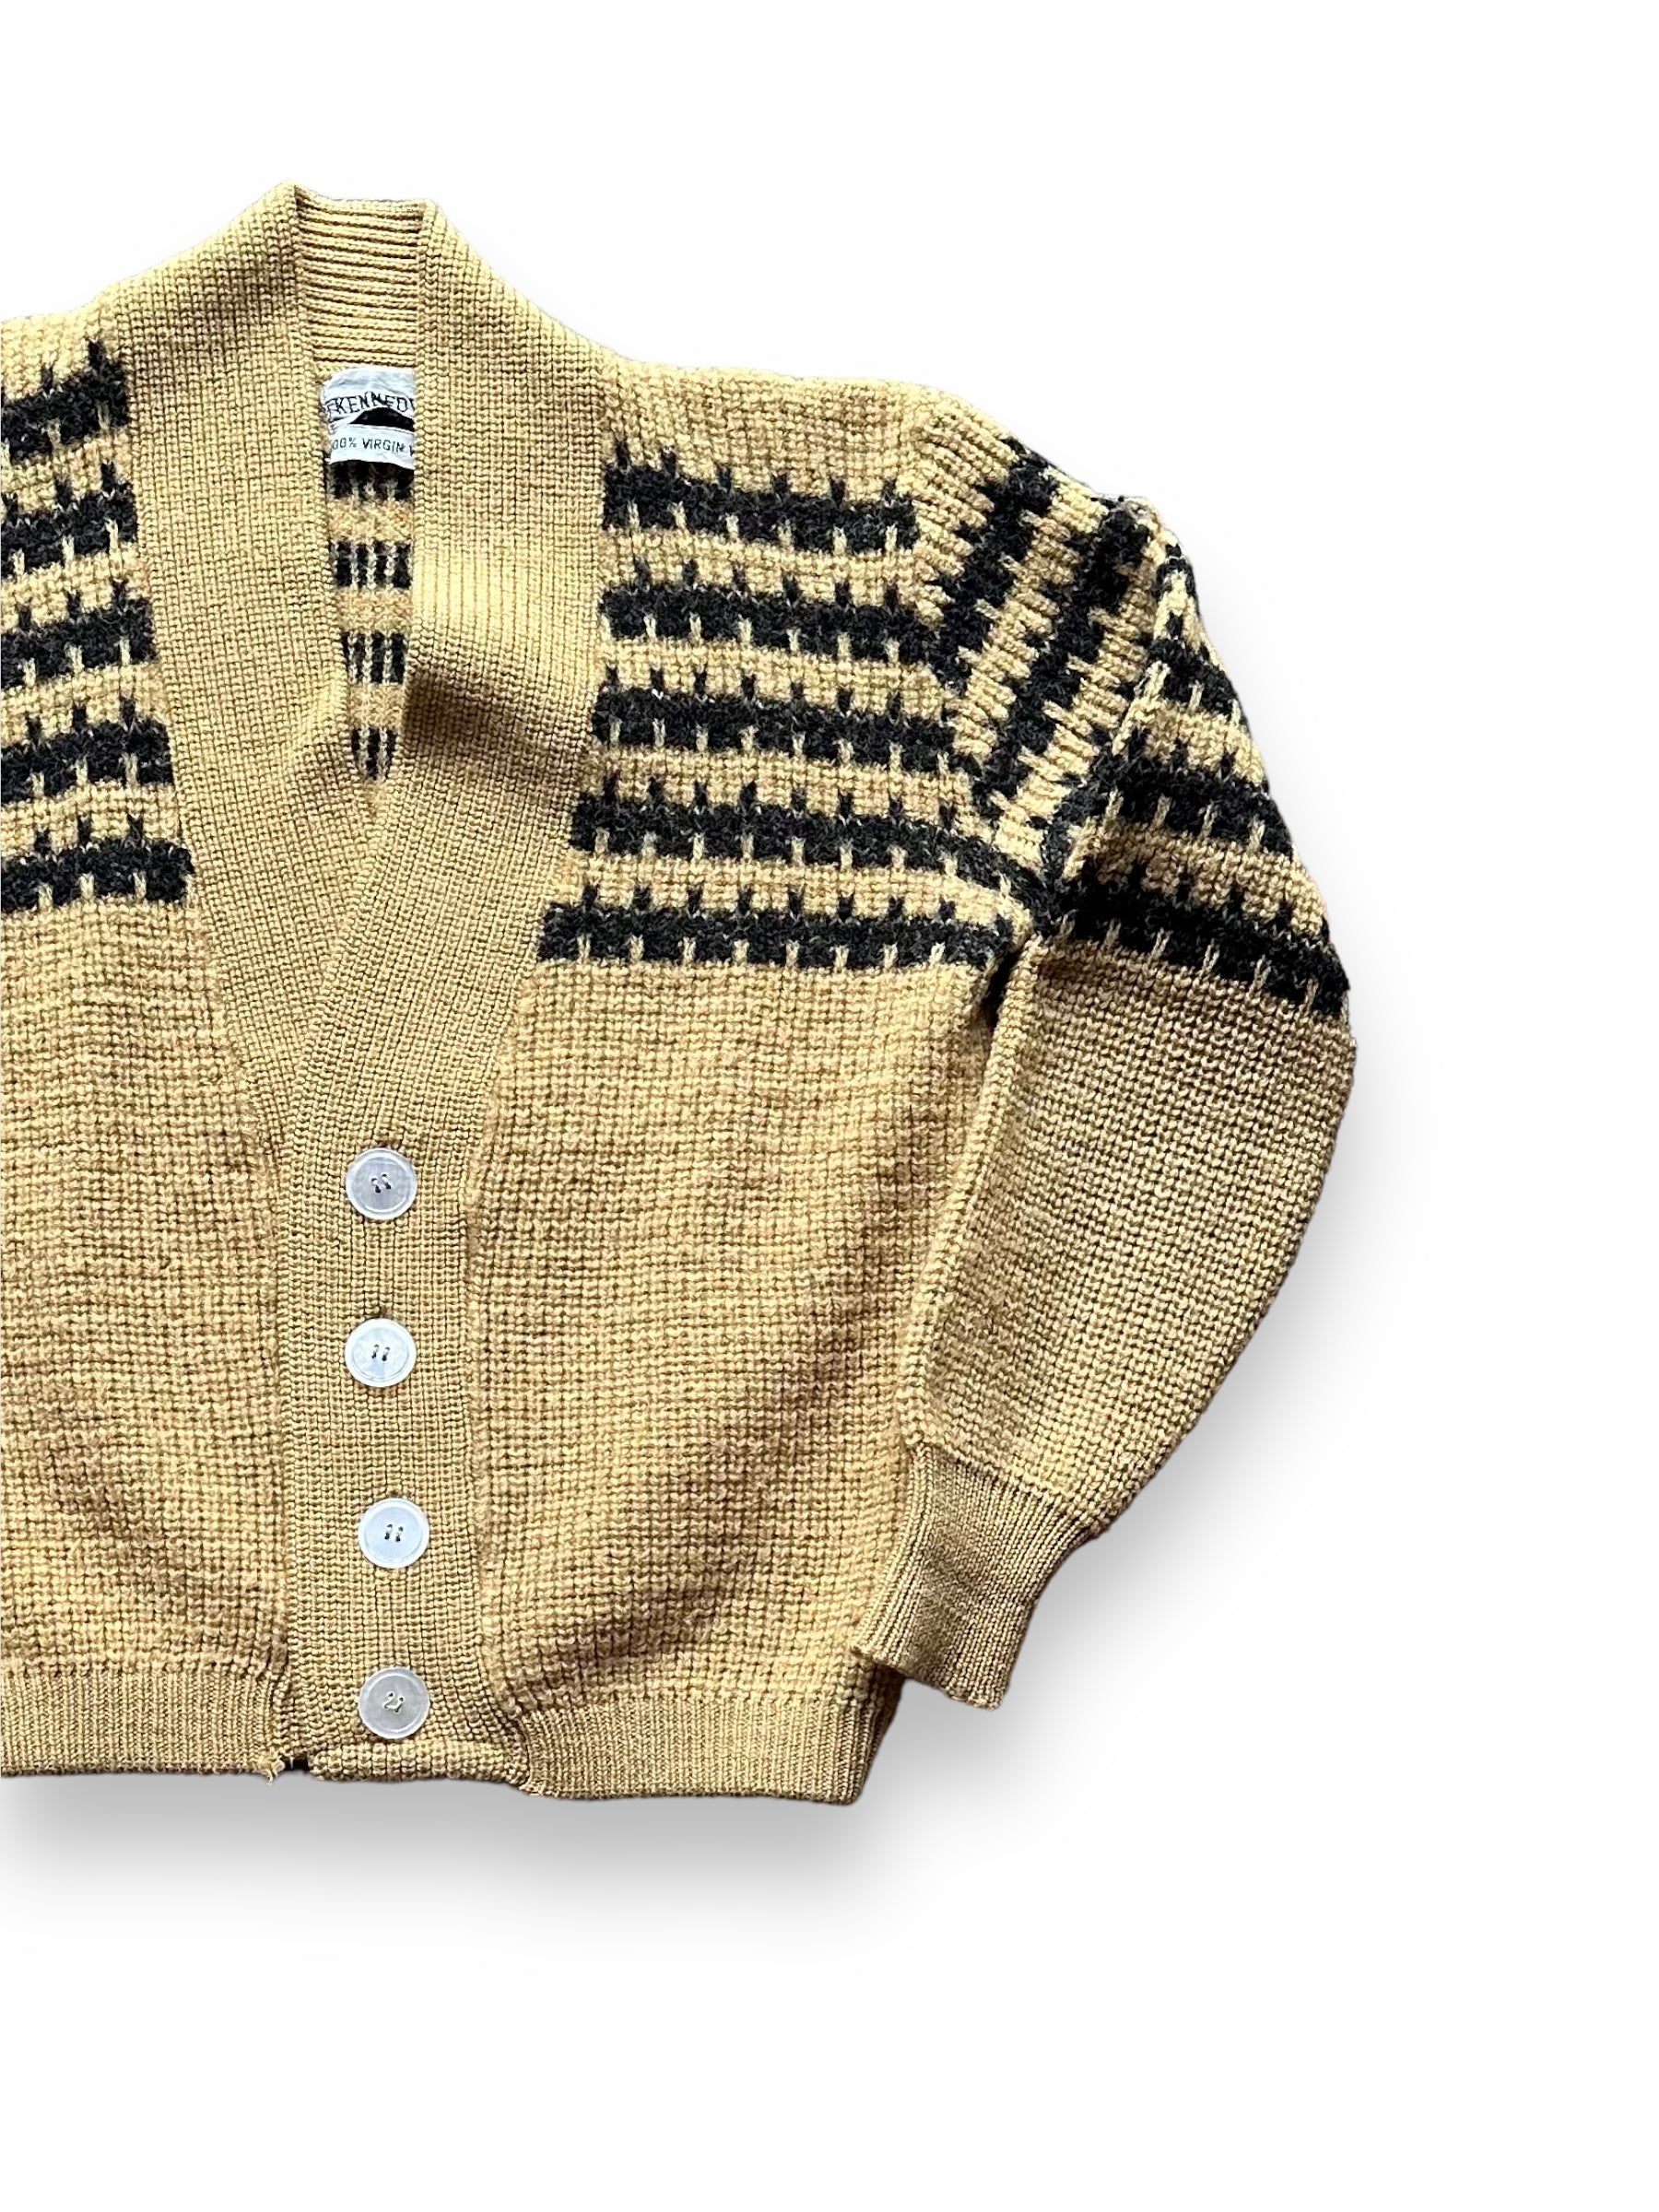 Front Left View of Vintage Kennedys Wool Sweater SZ L | Vintage Cardigan Sweaters Seattle | Barn Owl Vintage Seattle